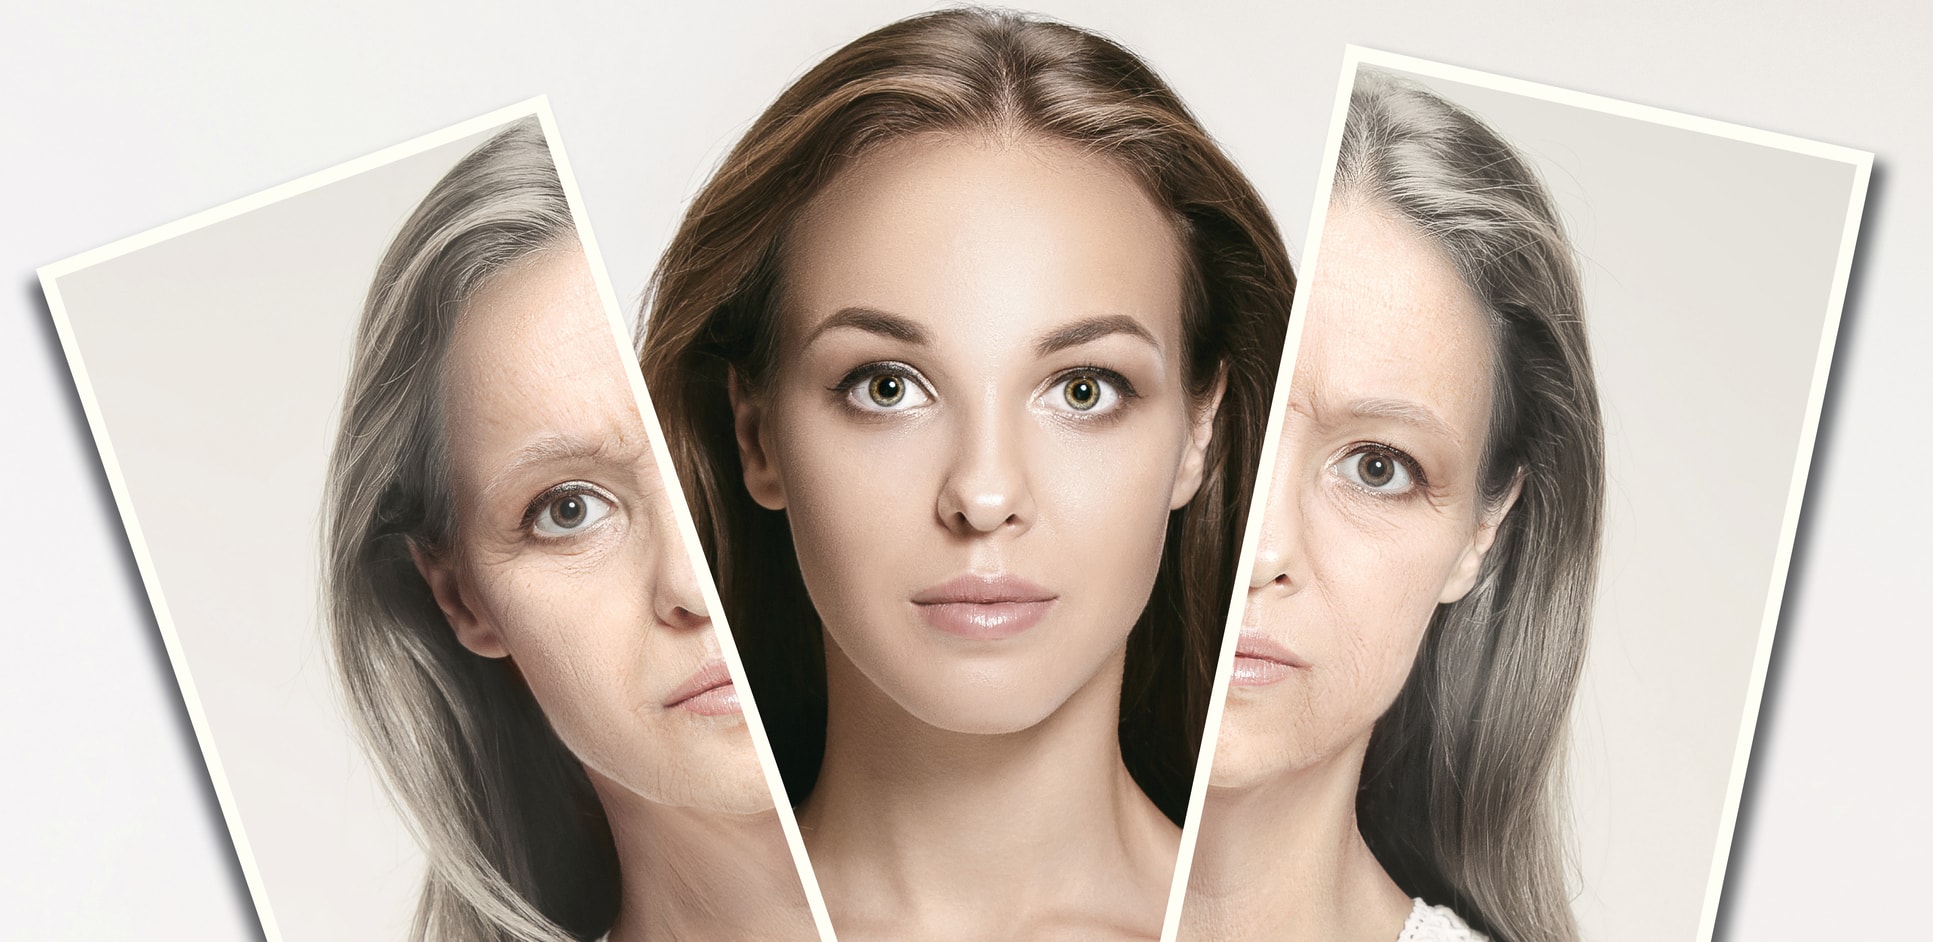 Cosmetic surgery growth is linked to age discrimination